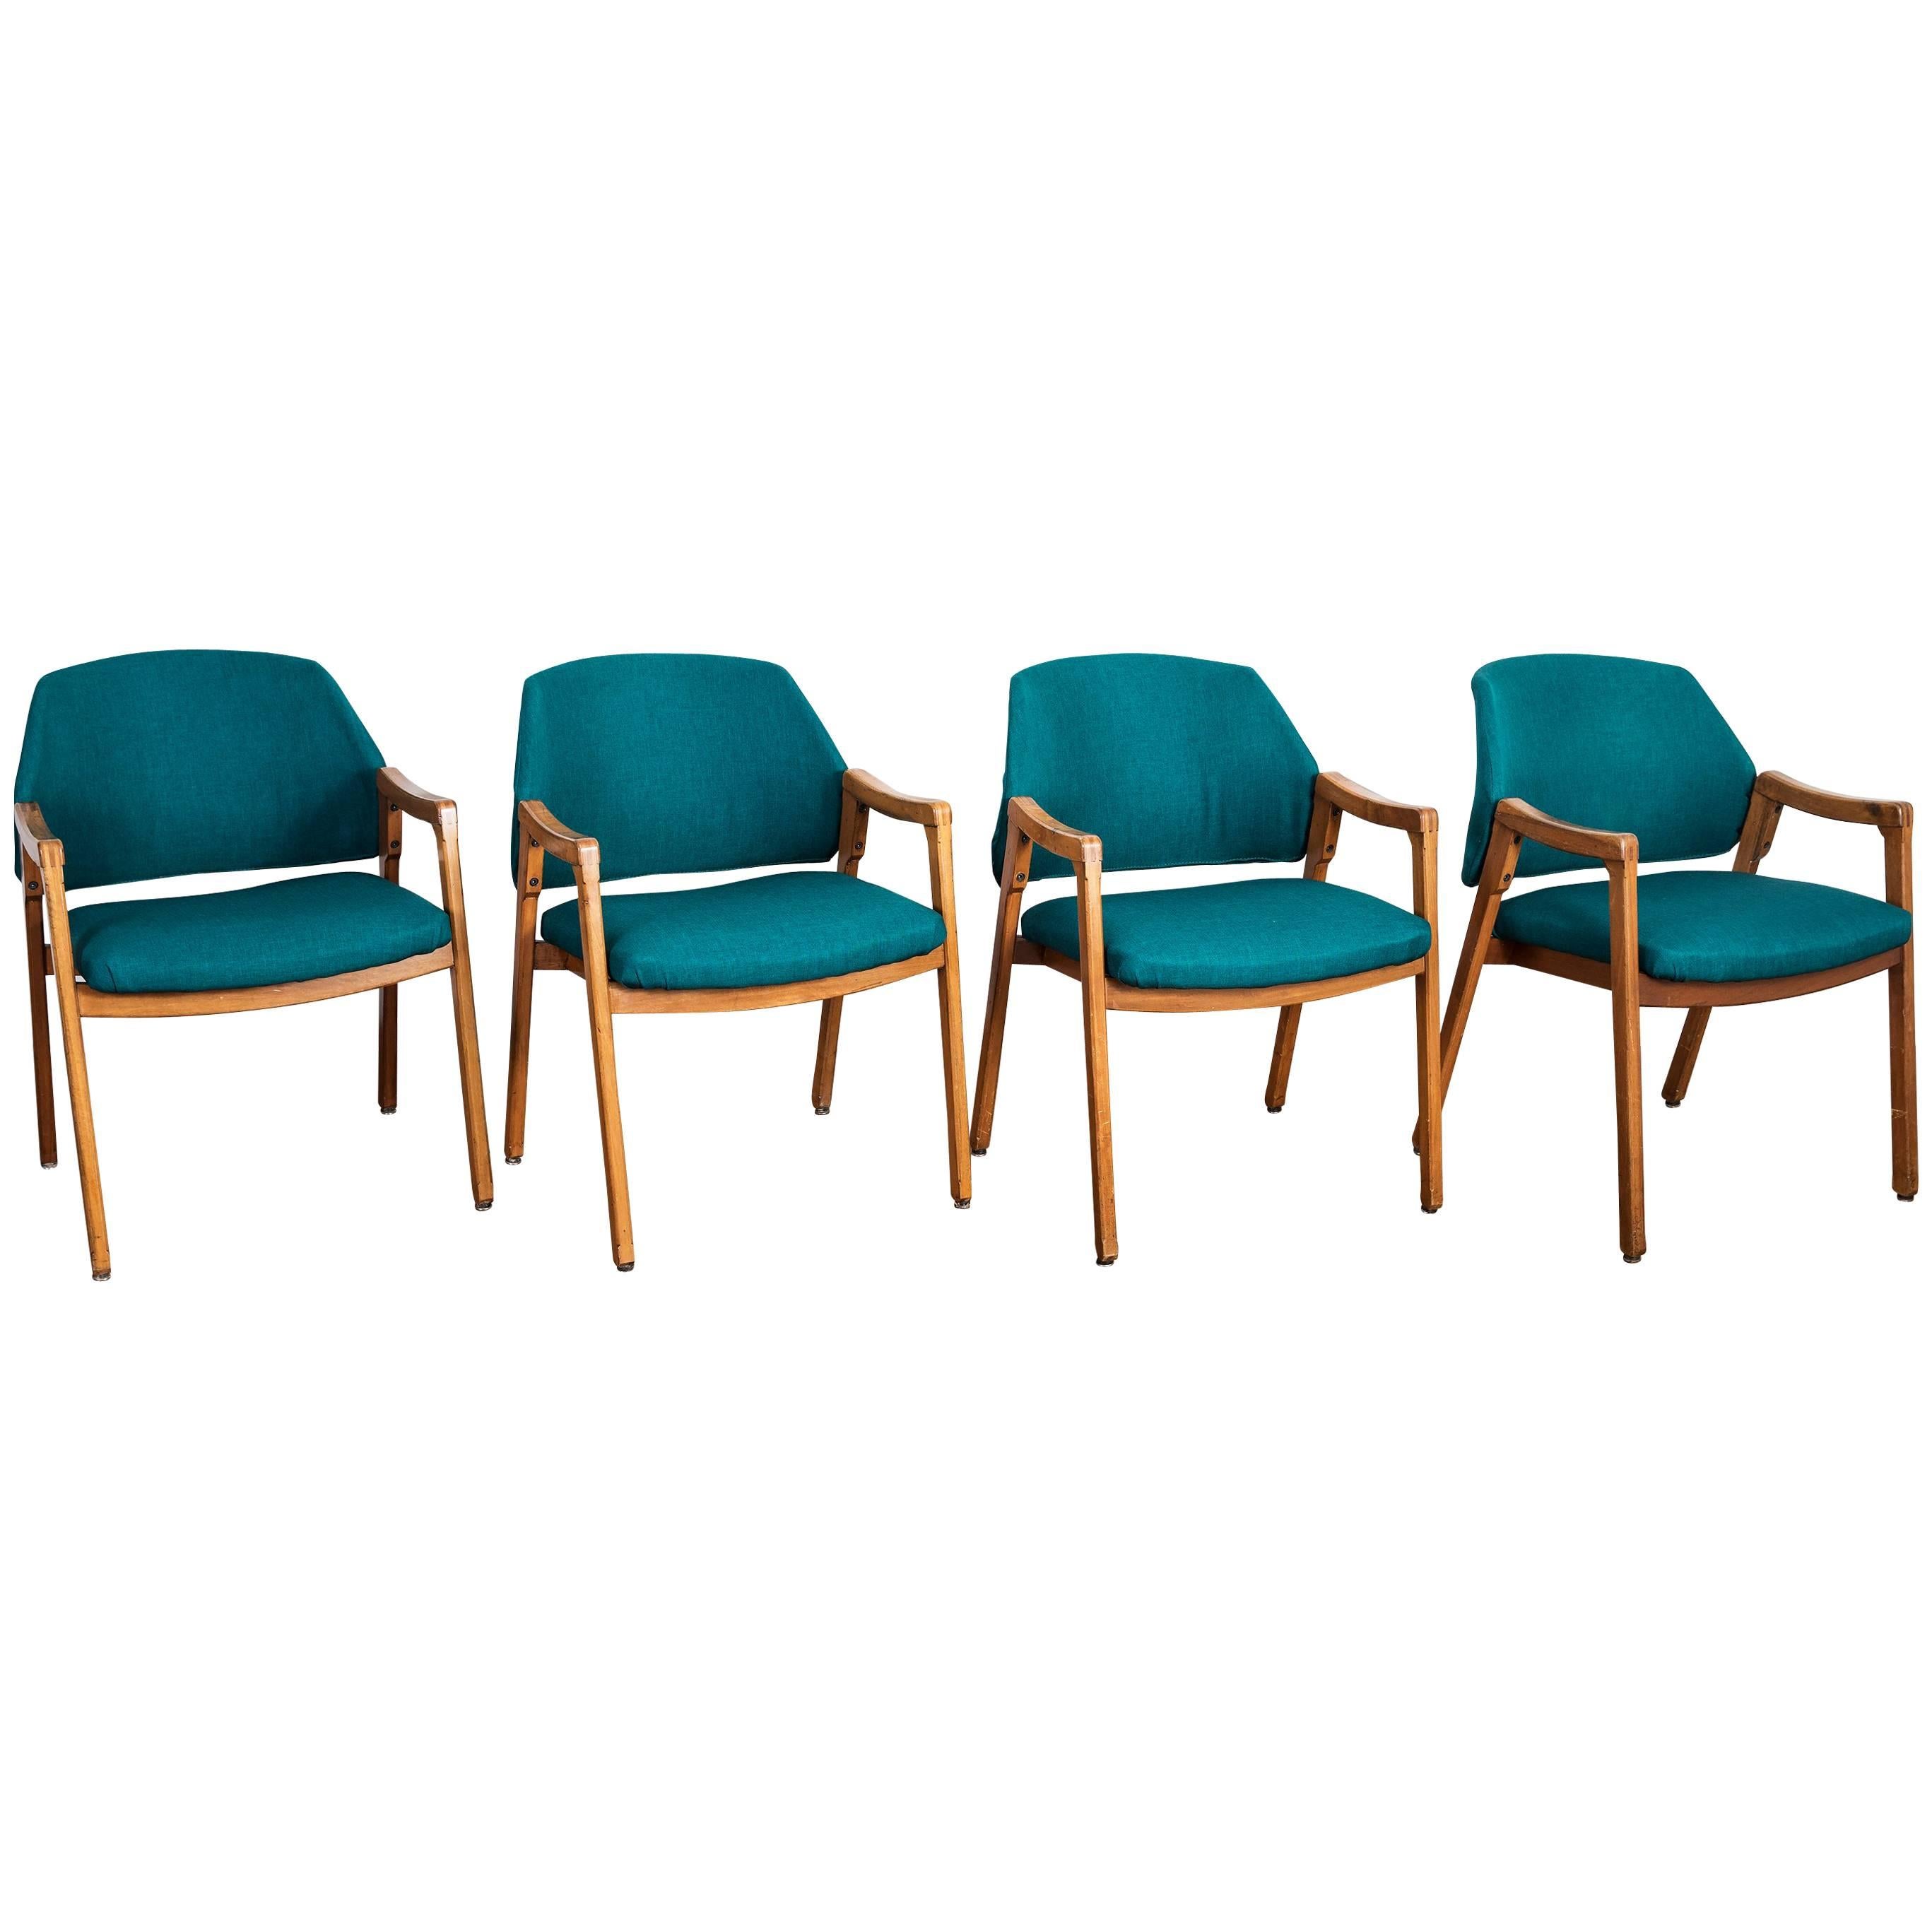 Set of Four Dining Chair '814' Designed by Ico Parisi for Cassina